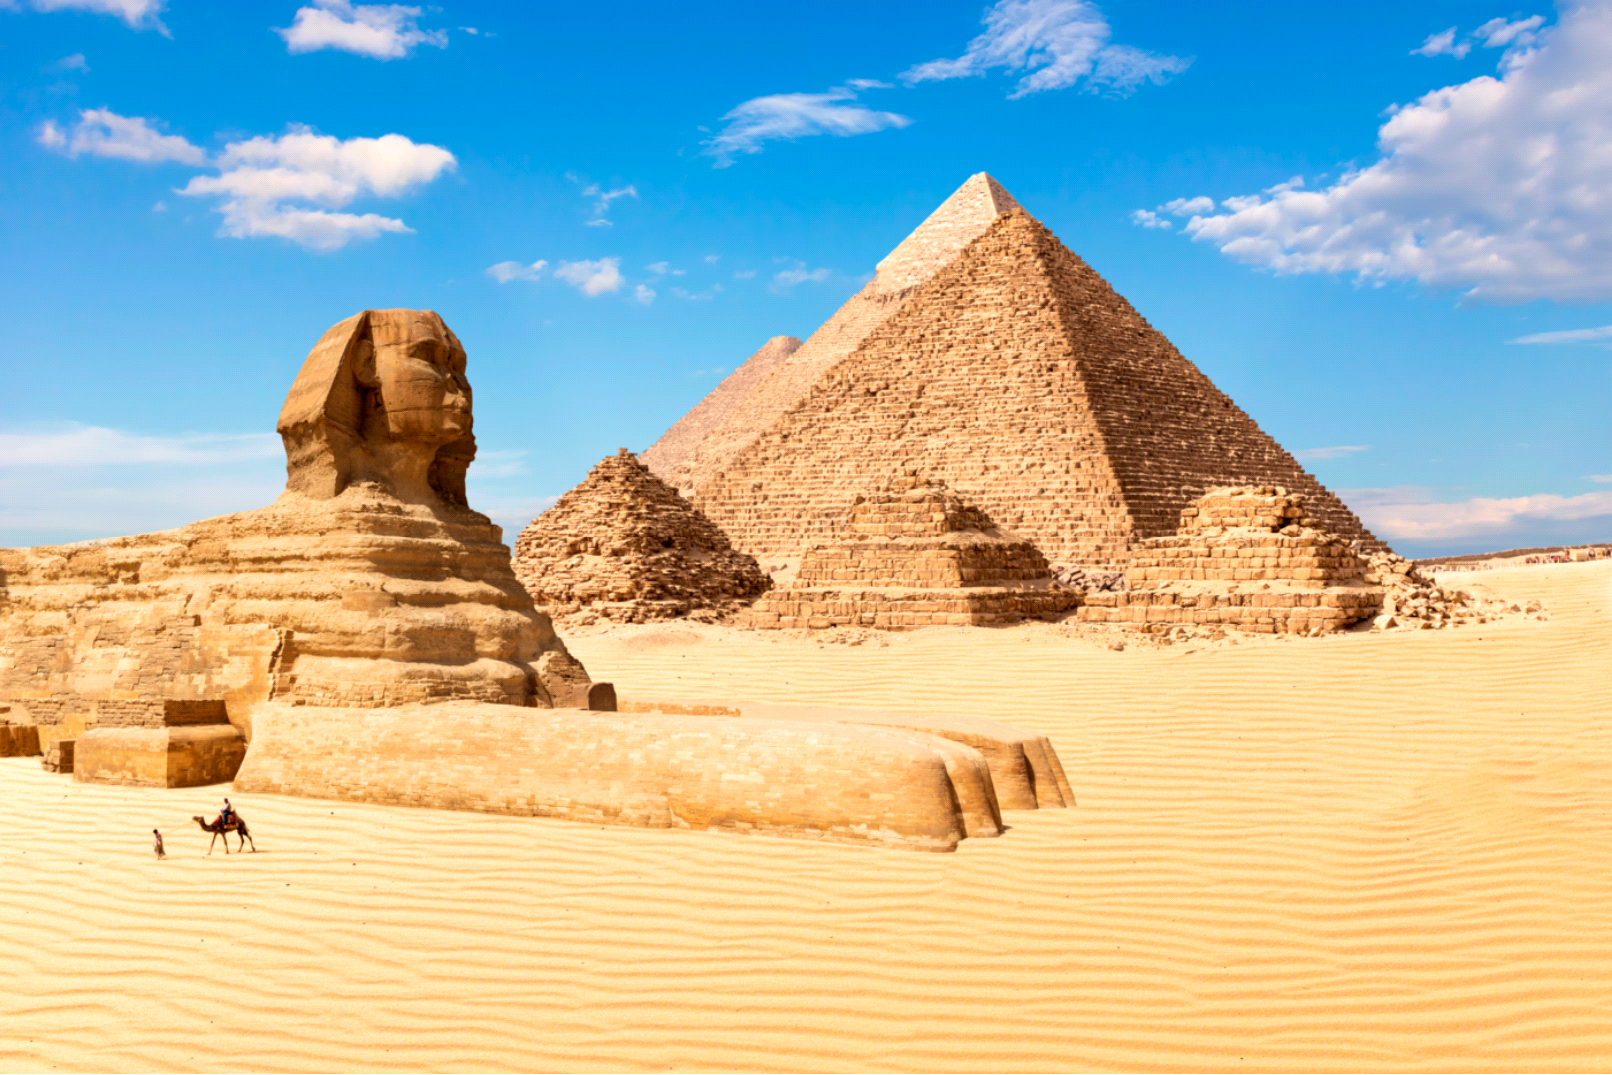 The Sphinx and The Pyramids of Giza, Egypt